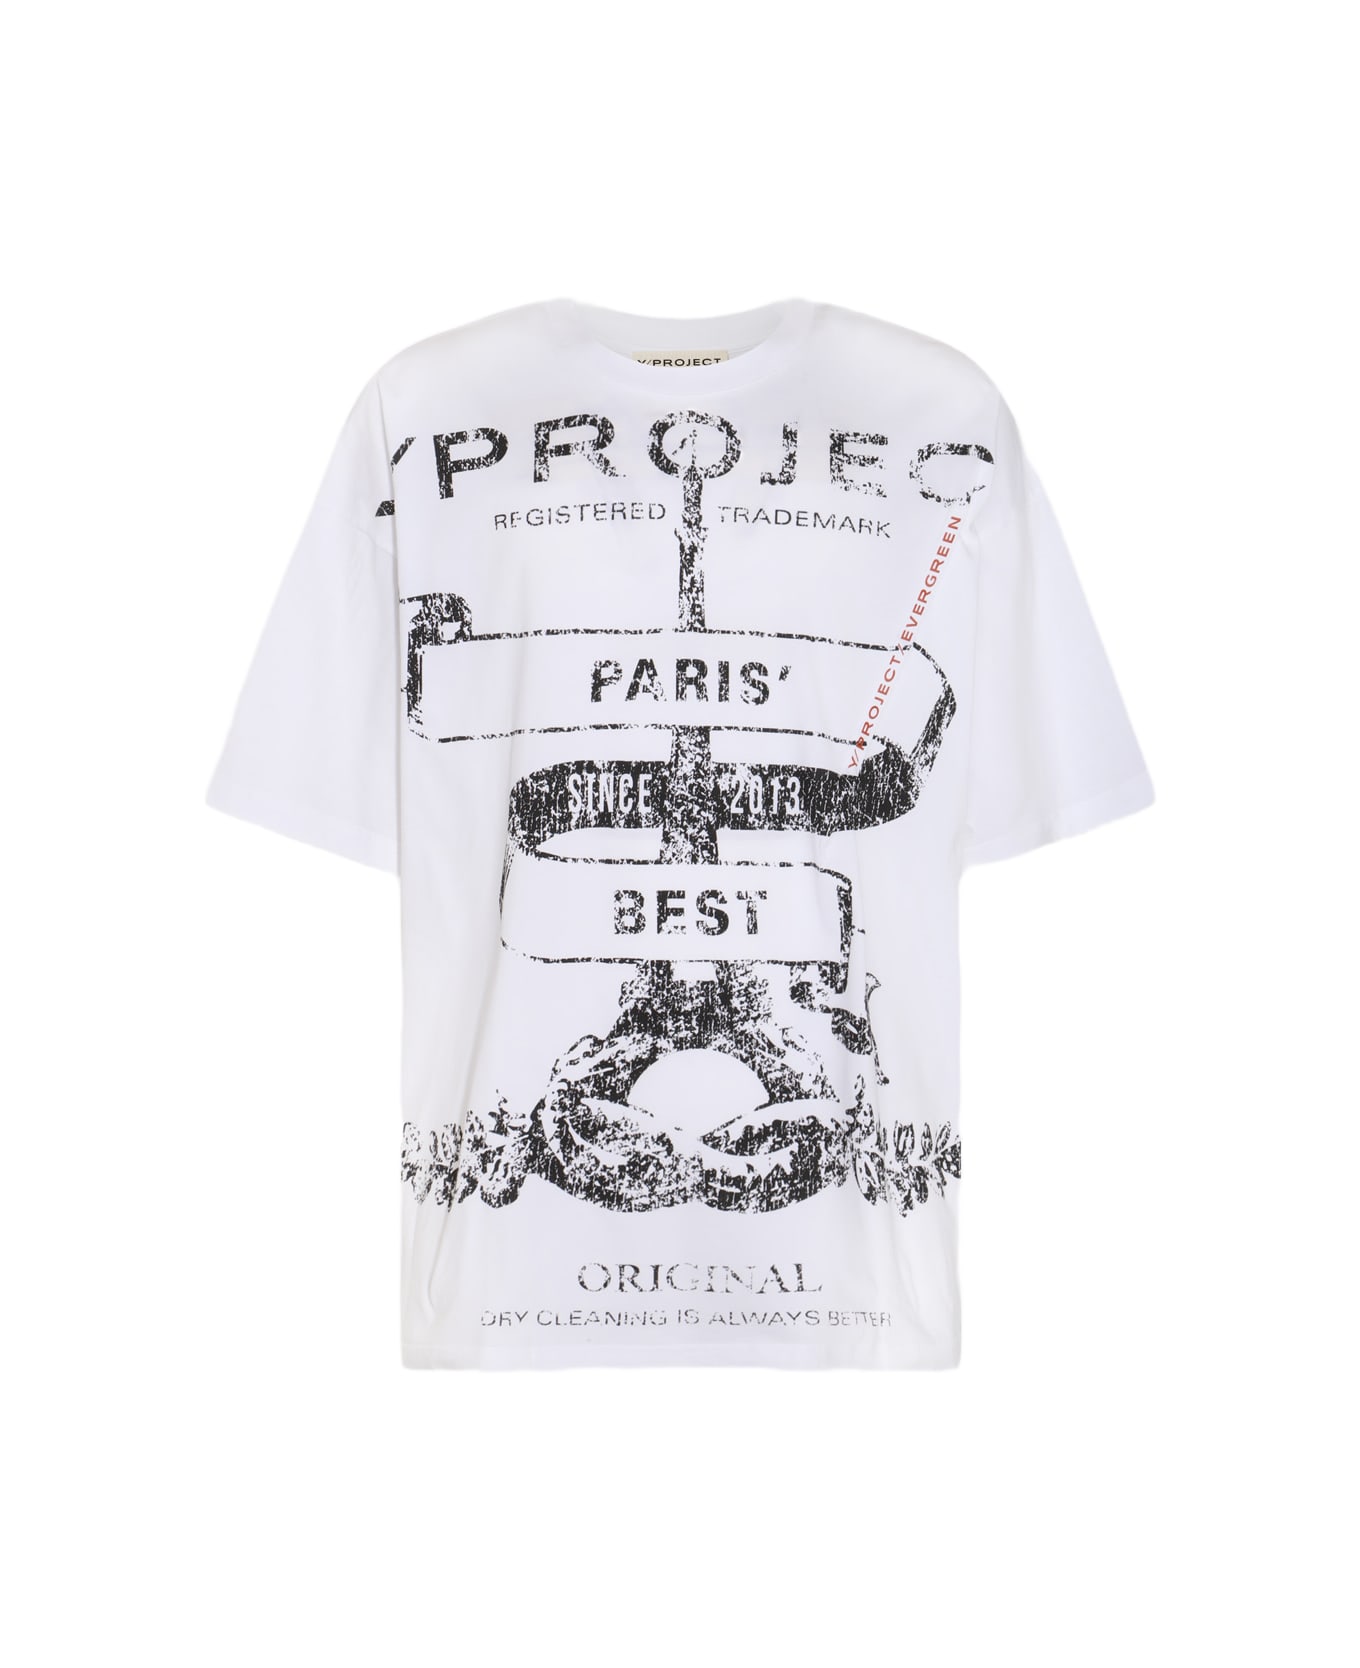 Y/Project White, Black And Red Cotton T-shirt シャツ